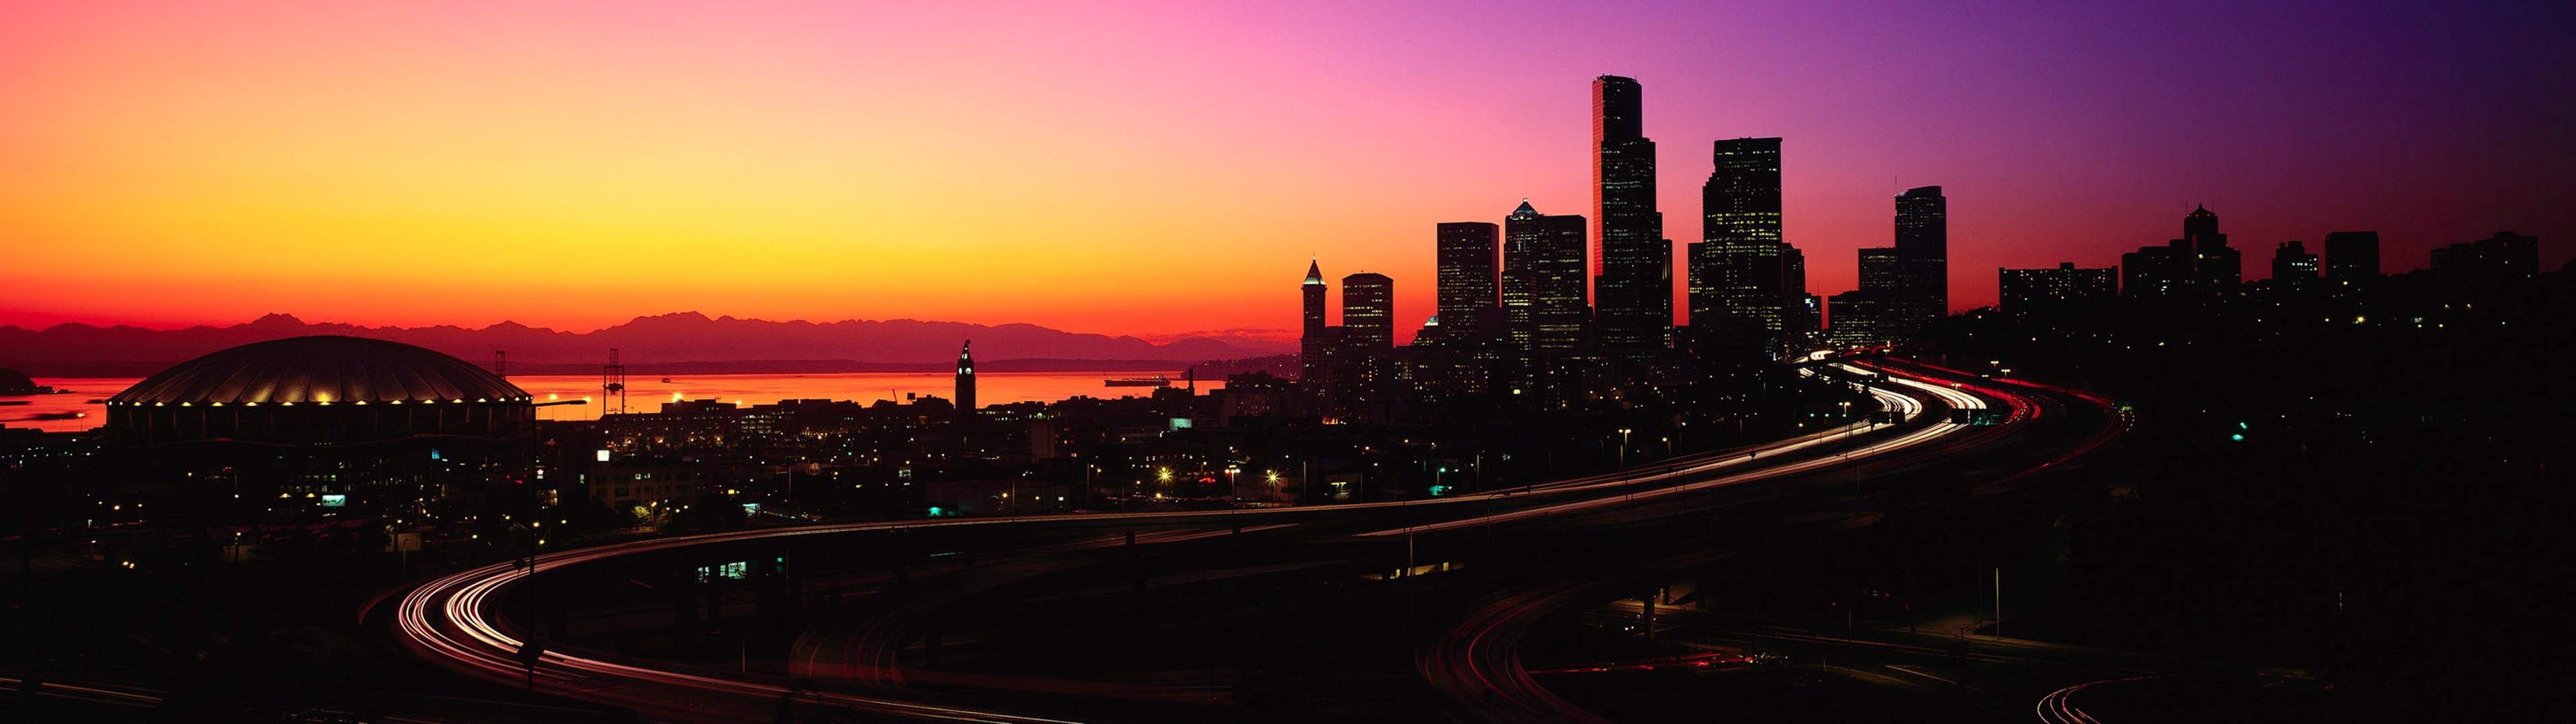 Skyline: The late dusk view of the stadium and the business district of Seattle, Washington State. 3840x1080 Dual Screen Background.